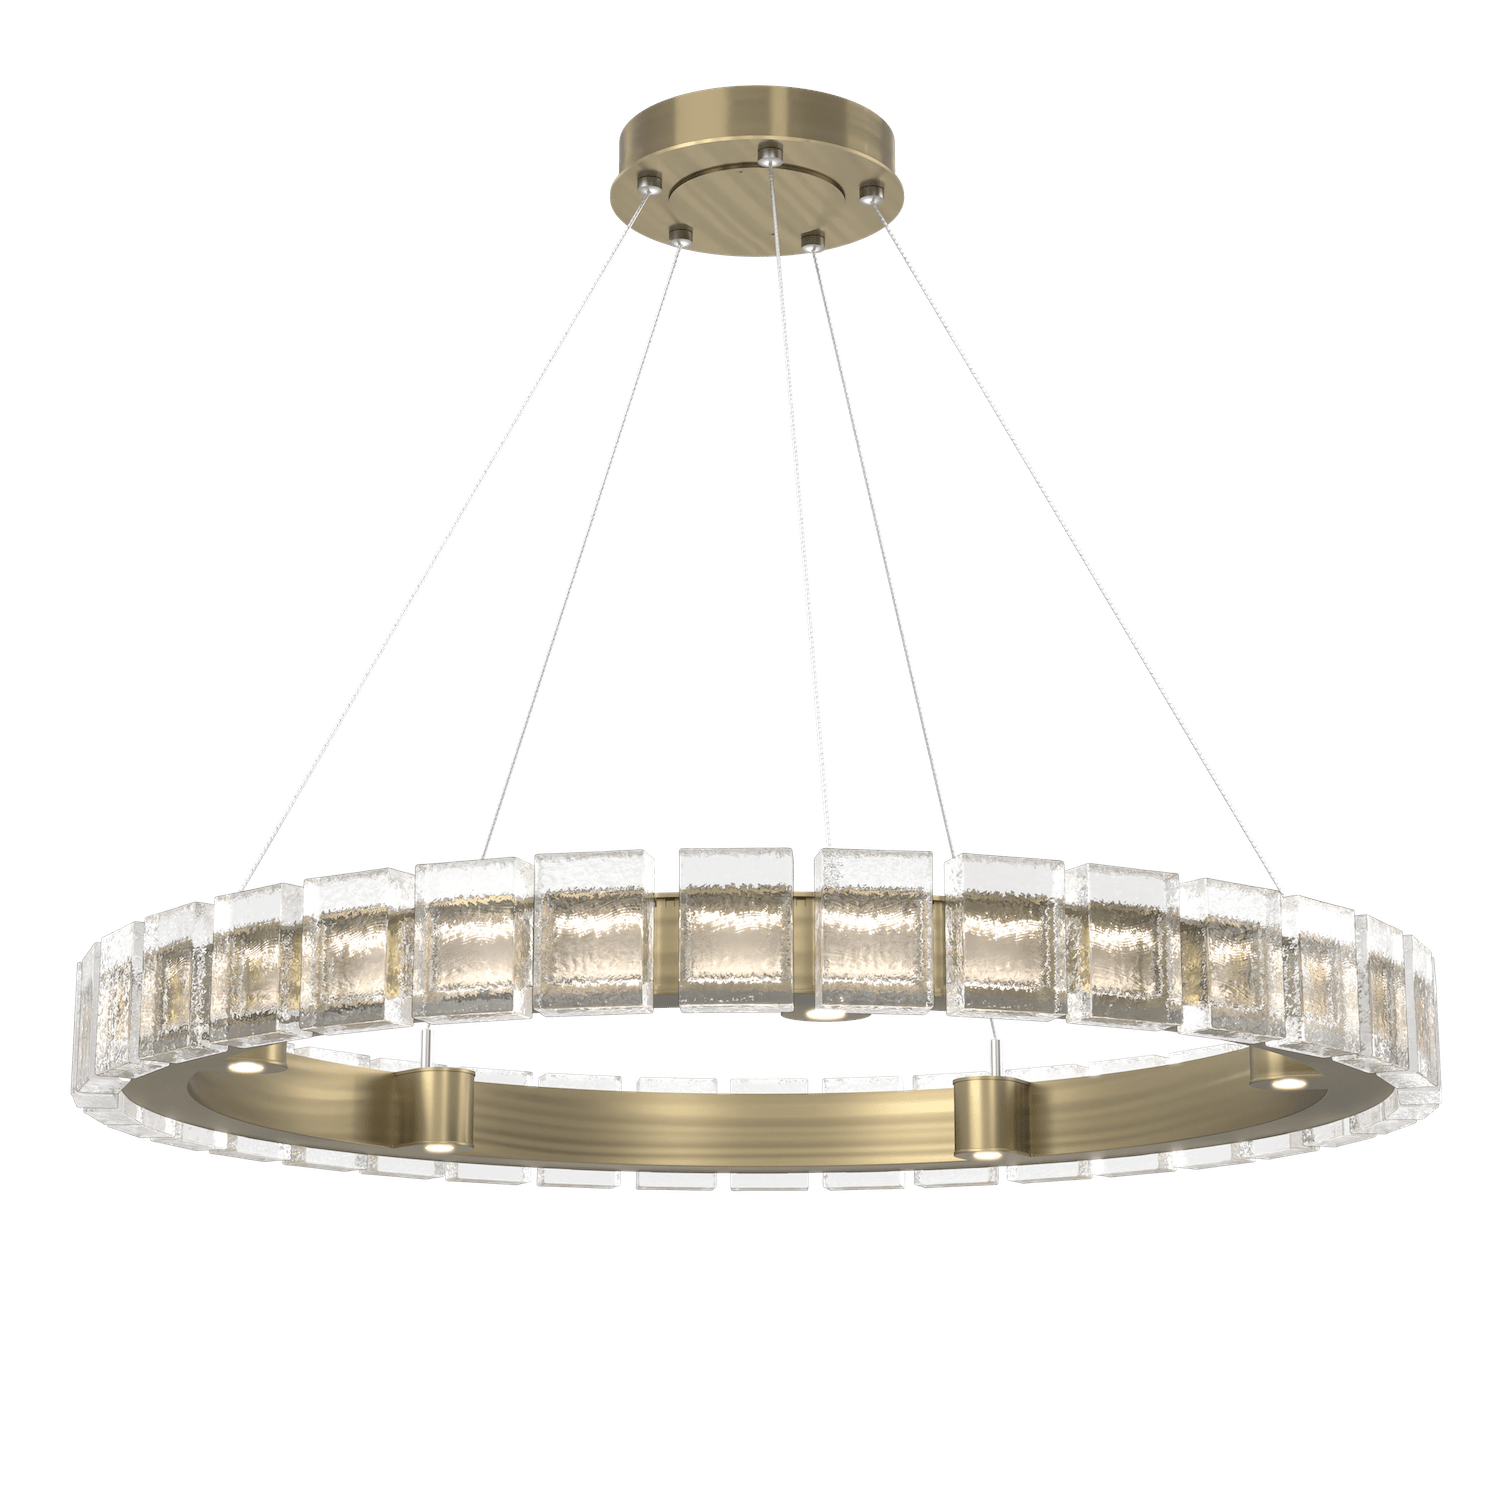 CHB0087-38-HB-TP-Hammerton-Studio-Tessera-38-inch-ring-chandelier-with-heritage-brass-finish-and-clear-pave-cast-glass-shade-and-LED-lamping